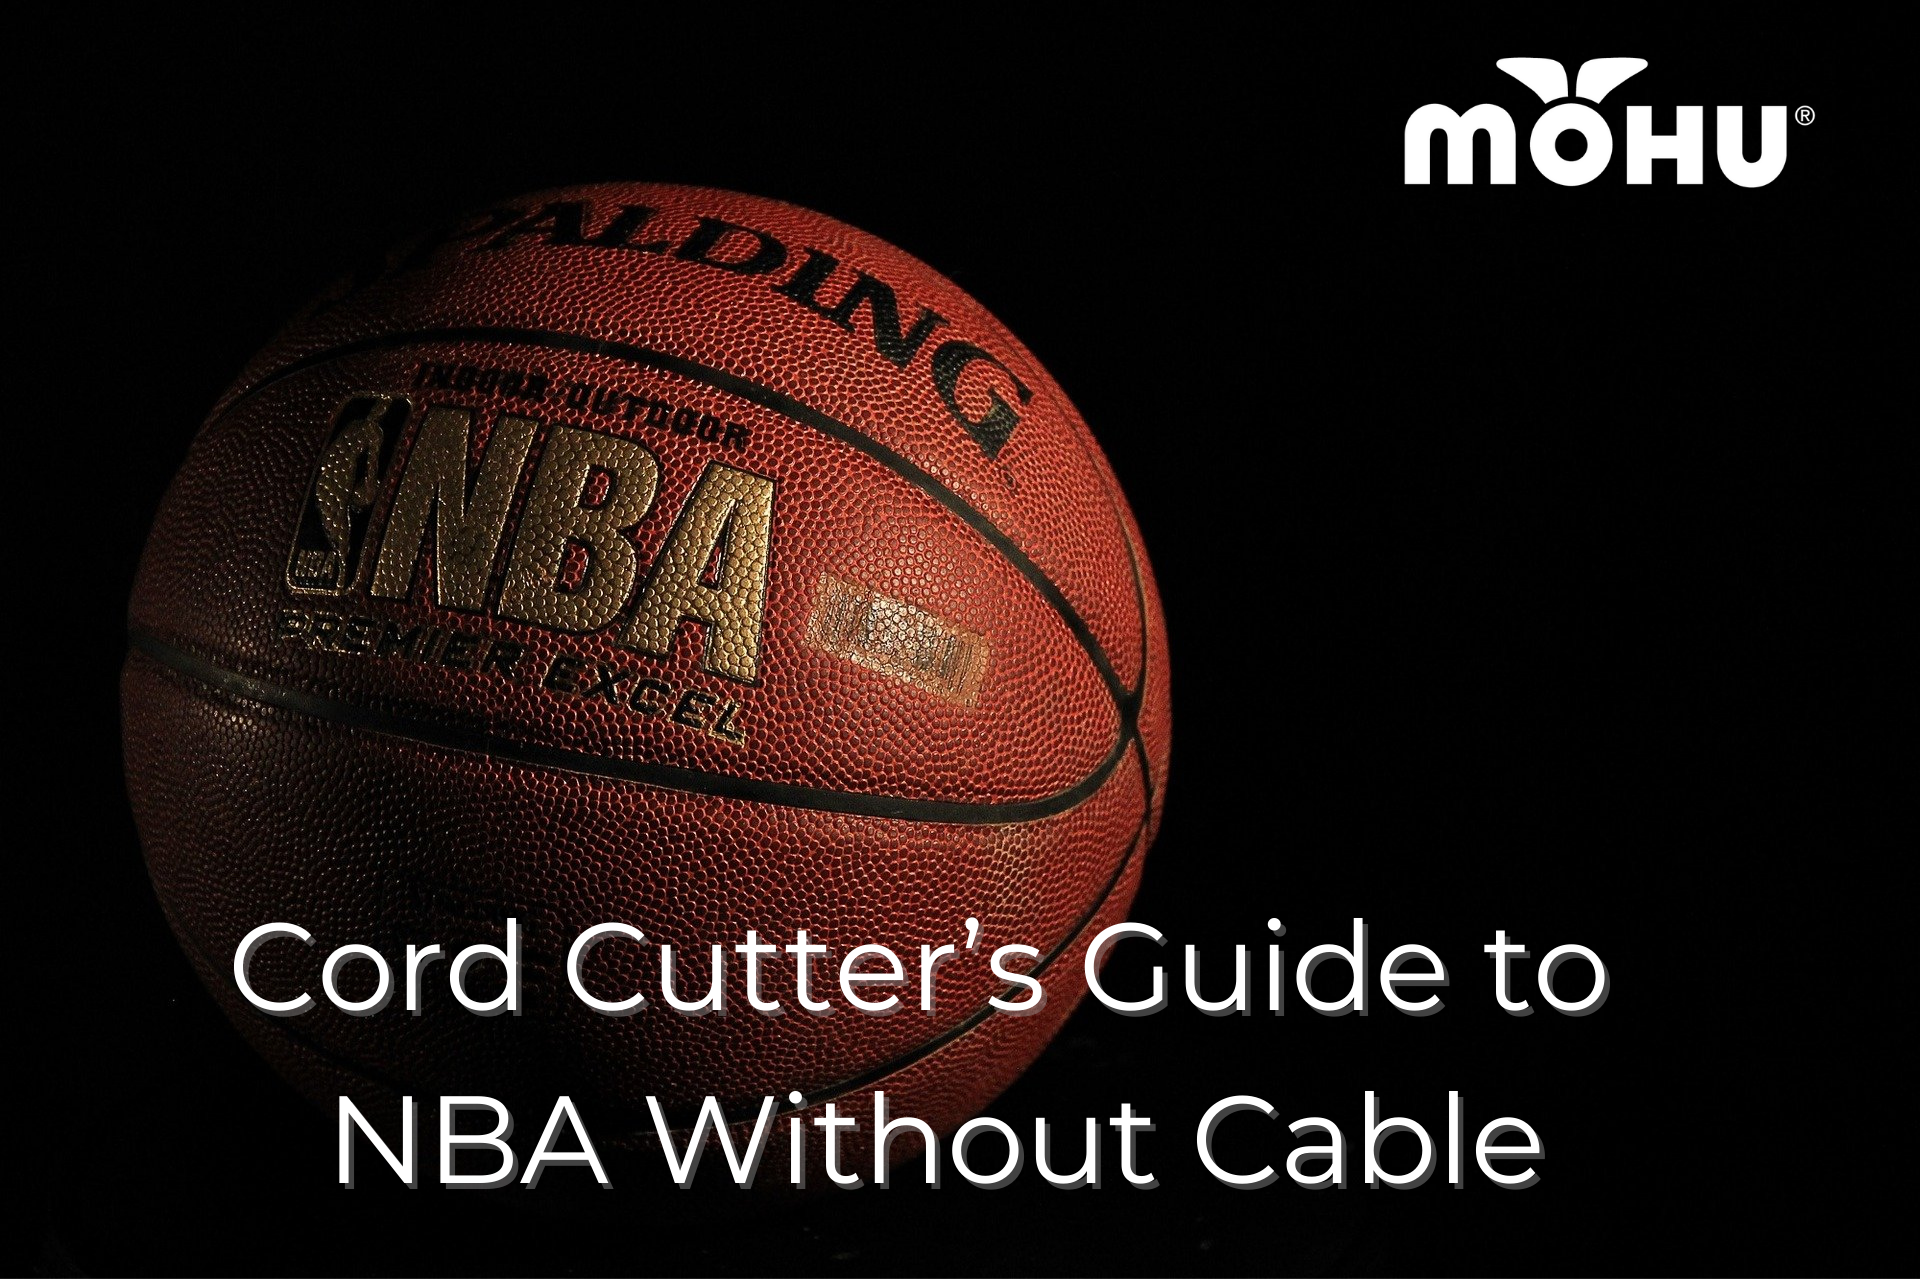 Spalding Basketball with black background, Cord Cutter’s Guide to NBA Without Cable